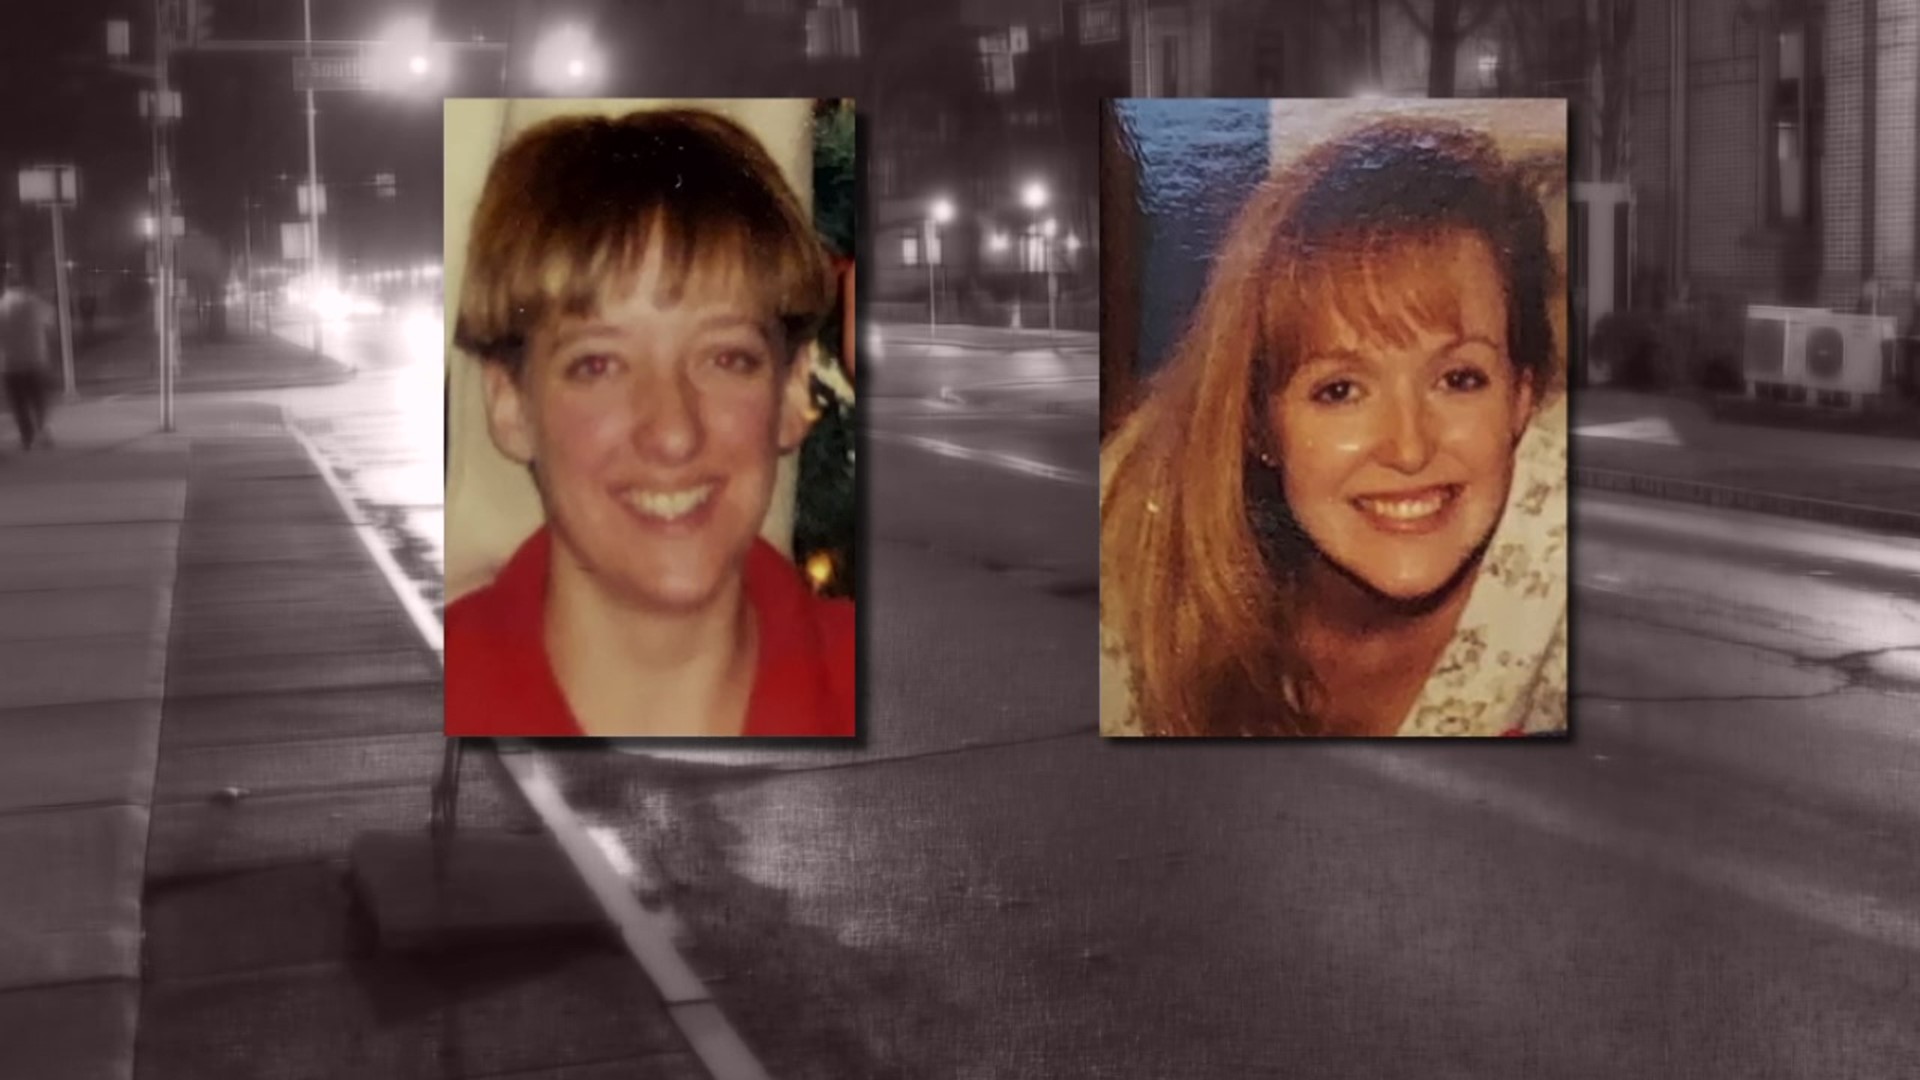 34 years later, two women share the story of the assault they survived in Wilkes-Barre.